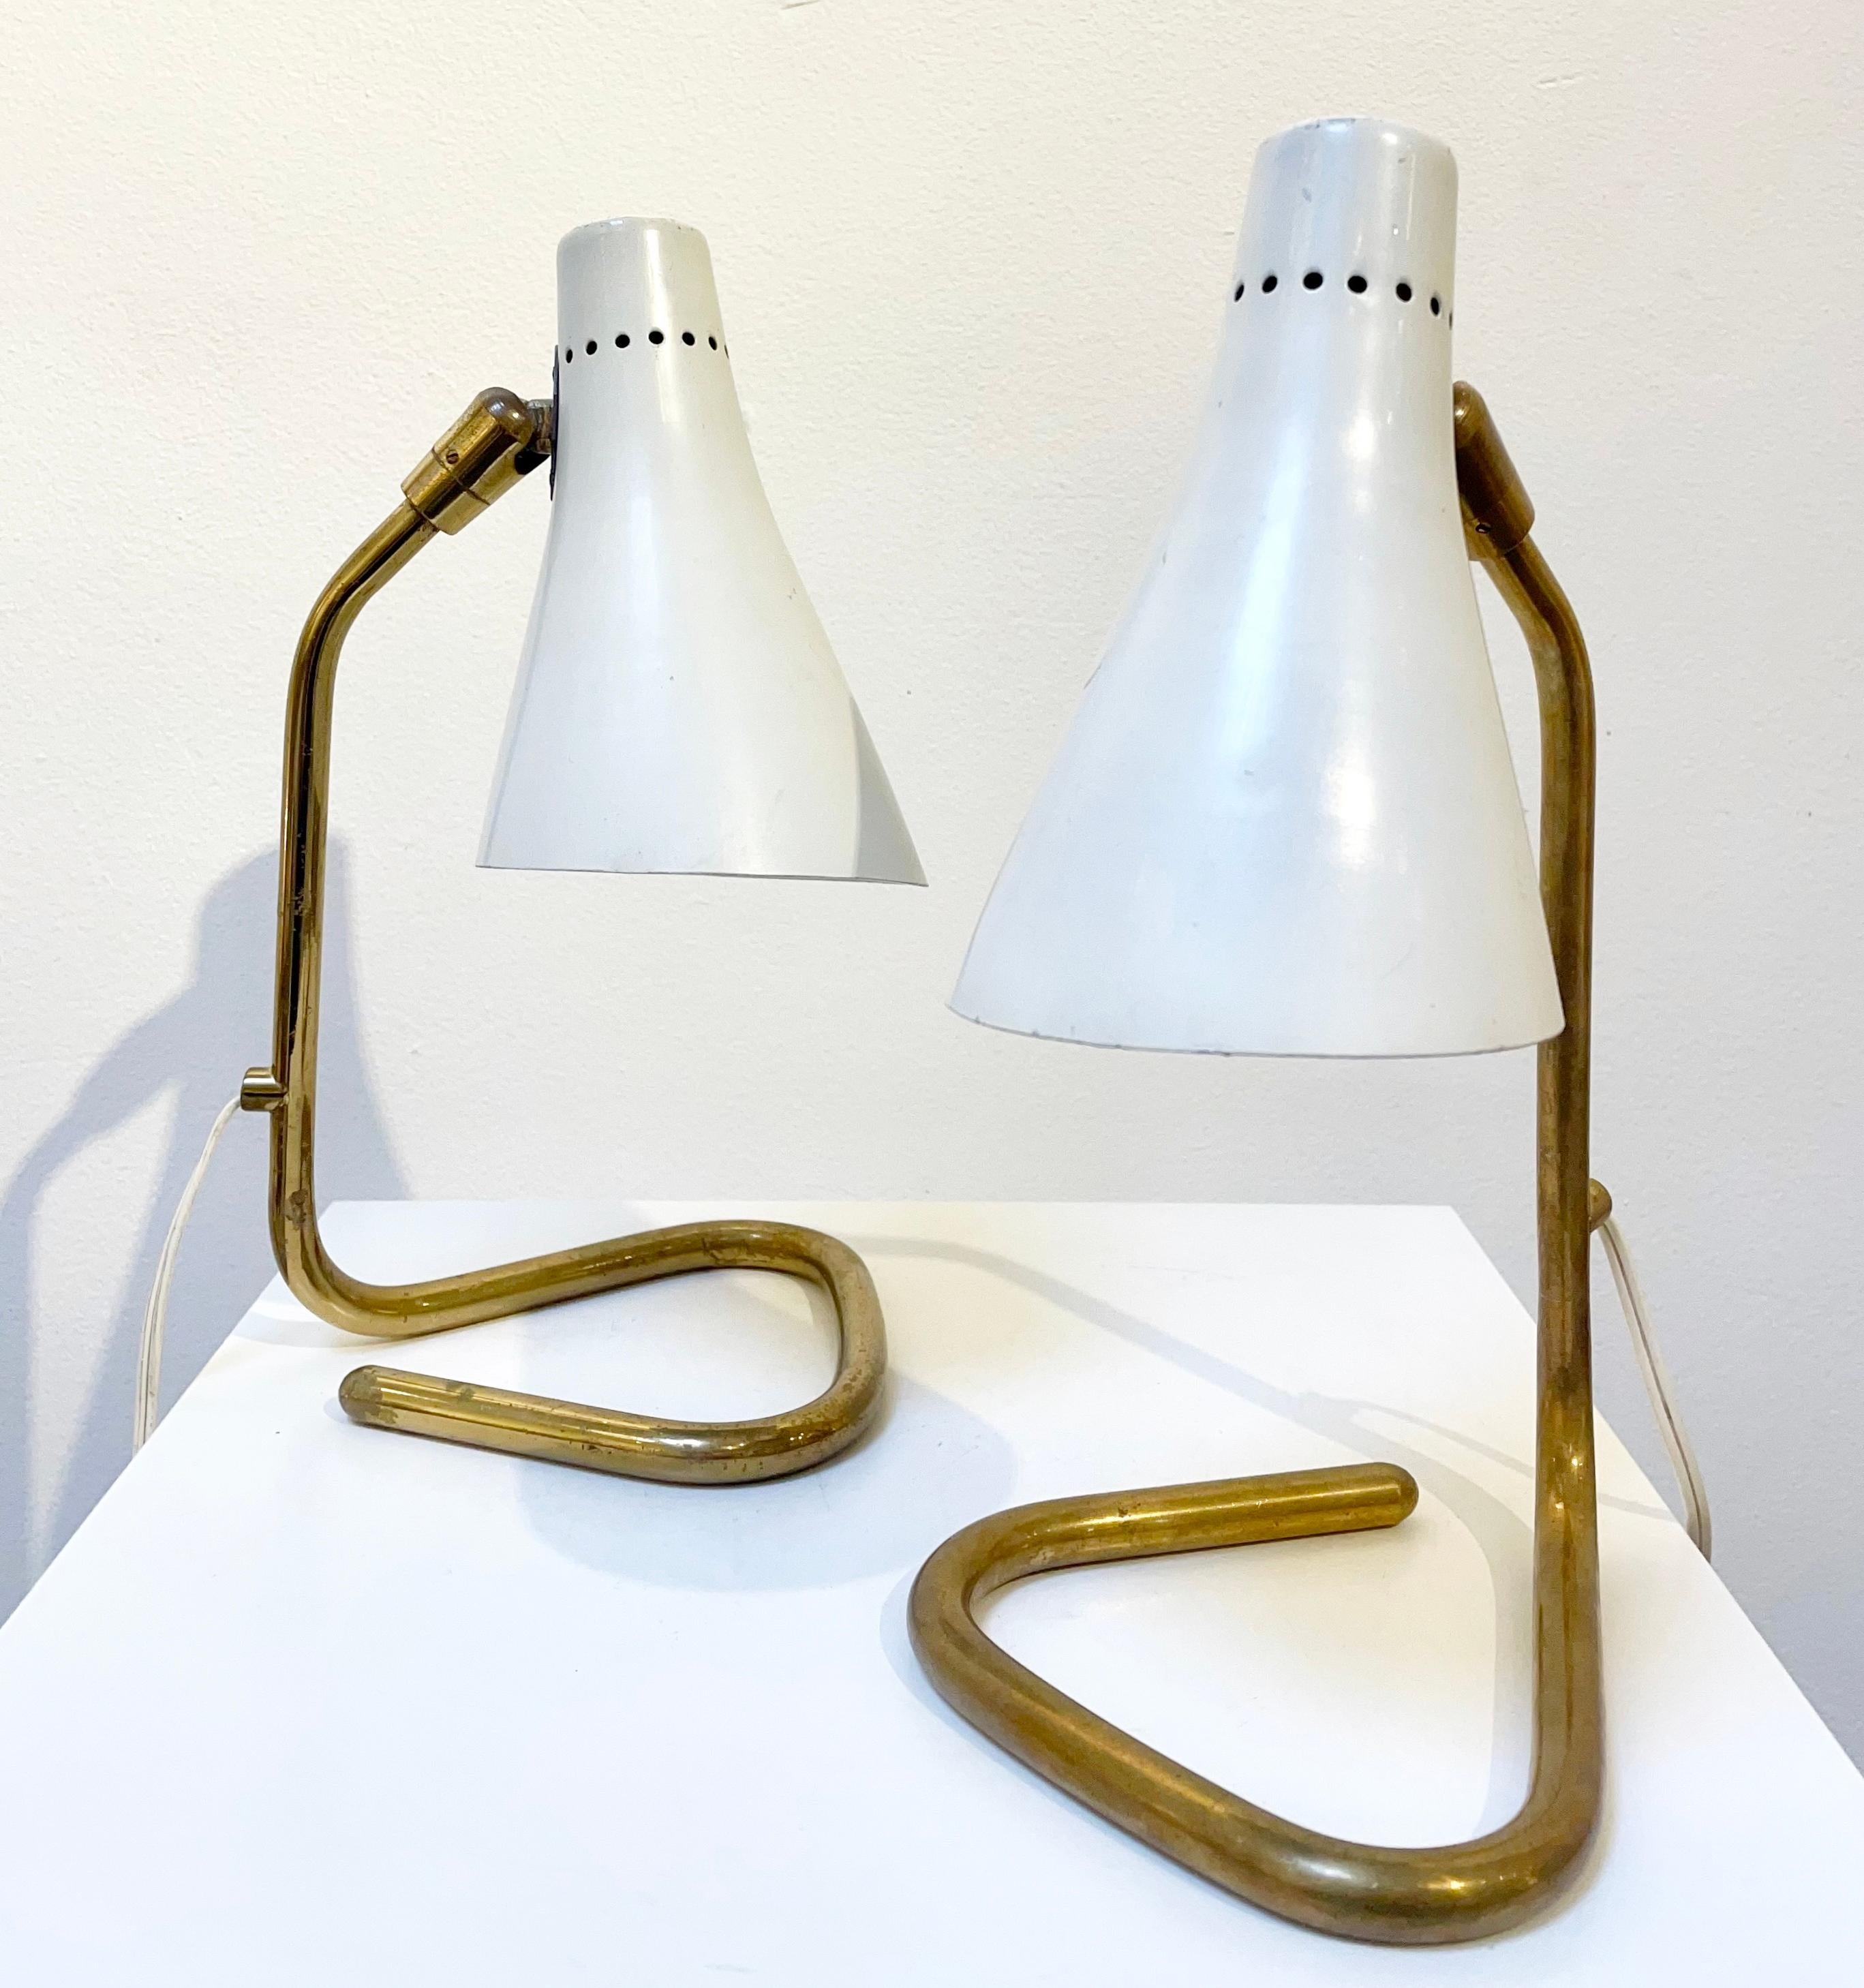 Pair of mid-century white brass and metal modulable table lamps by Guiseppe Ostuni - Italy 1950s.